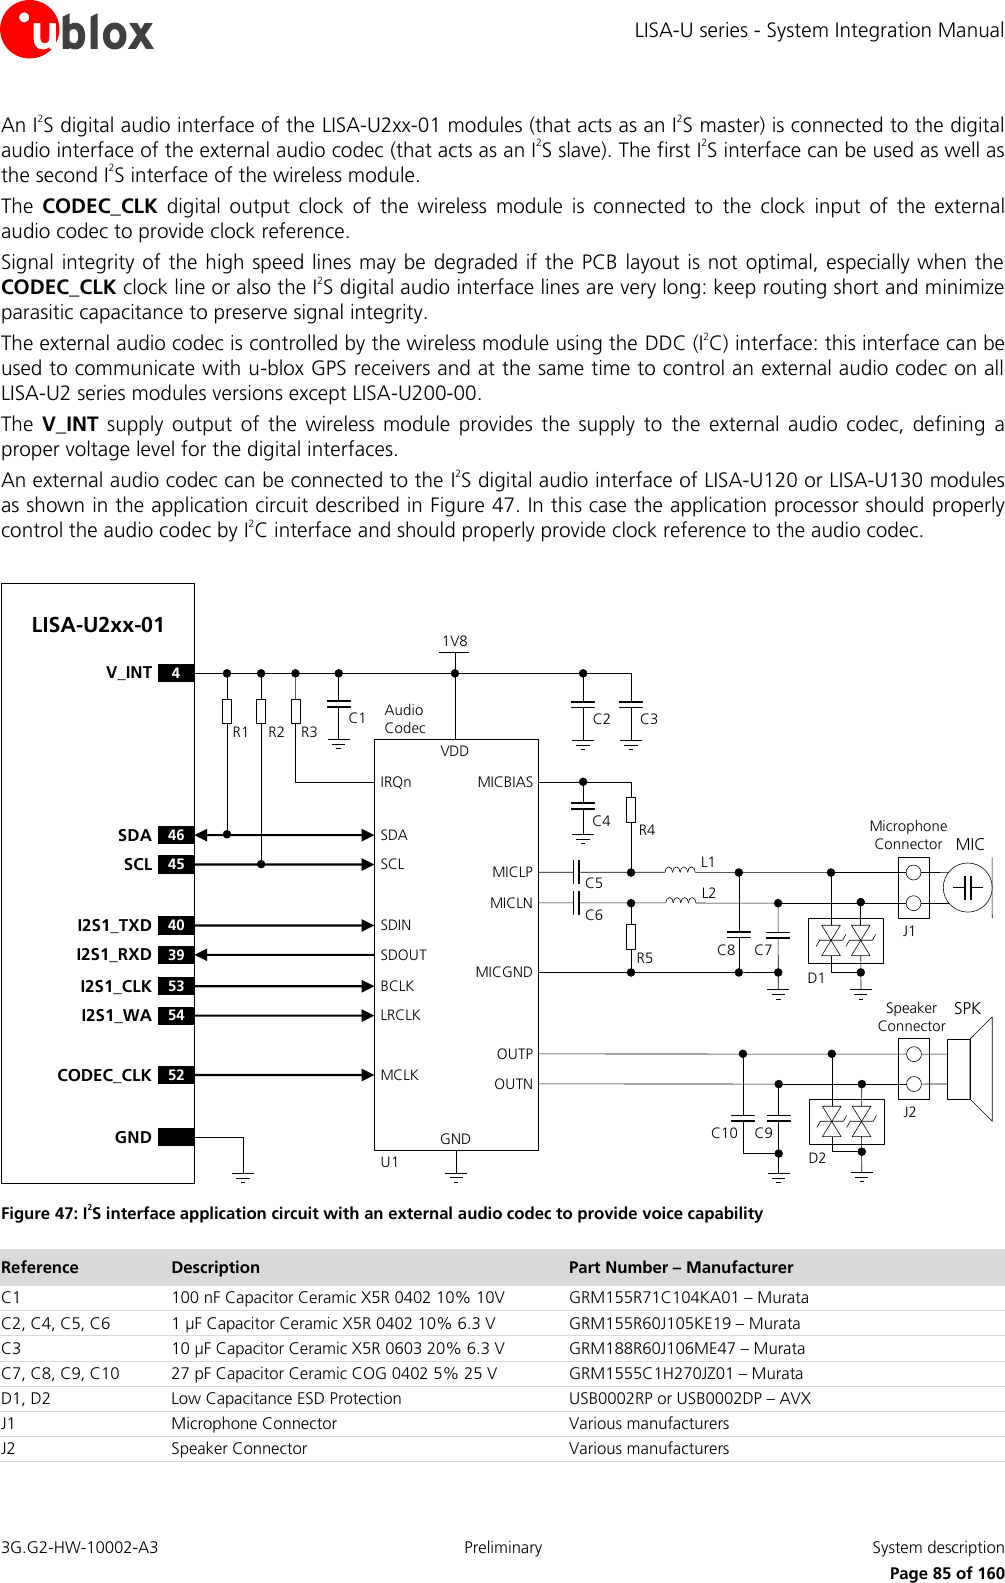 LISA-U series - System Integration Manual 3G.G2-HW-10002-A3  Preliminary  System description      Page 85 of 160 An I2S digital audio interface of the LISA-U2xx-01 modules (that acts as an I2S master) is connected to the digital audio interface of the external audio codec (that acts as an I2S slave). The first I2S interface can be used as well as the second I2S interface of the wireless module. The  CODEC_CLK  digital  output  clock  of  the  wireless  module  is  connected  to  the  clock  input  of  the  external audio codec to provide clock reference. Signal integrity of the high speed lines may be degraded if the PCB layout is not  optimal, especially when the CODEC_CLK clock line or also the I2S digital audio interface lines are very long: keep routing short and minimize parasitic capacitance to preserve signal integrity. The external audio codec is controlled by the wireless module using the DDC (I2C) interface: this interface can be used to communicate with u-blox GPS receivers and at the same time to control an external audio codec on all LISA-U2 series modules versions except LISA-U200-00. The  V_INT supply  output  of  the wireless module  provides  the  supply to  the external  audio codec,  defining  a proper voltage level for the digital interfaces. An external audio codec can be connected to the I2S digital audio interface of LISA-U120 or LISA-U130 modules as shown in the application circuit described in Figure 47. In this case the application processor should properly control the audio codec by I2C interface and should properly provide clock reference to the audio codec.  53I2S1_CLK54I2S1_WAR2R1BCLKGNDU1LRCLKC3C2LISA-U2xx-01Audio   Codec40I2S1_TXD39I2S1_RXDSDINSDOUT46SDA45SCLSDASCL52CODEC_CLK MCLKGNDIRQnR3 C1C10D2C9SPKSpeaker ConnectorOUTPOUTNJ24V_INTVDDMICBIASC4 R4C5C6L1MICLNMICLPD1Microphone ConnectorL2MICC8 C7J1MICGND R51V8 Figure 47: I2S interface application circuit with an external audio codec to provide voice capability Reference Description Part Number – Manufacturer C1 100 nF Capacitor Ceramic X5R 0402 10% 10V GRM155R71C104KA01 – Murata C2, C4, C5, C6 1 µF Capacitor Ceramic X5R 0402 10% 6.3 V GRM155R60J105KE19 – Murata C3 10 µF Capacitor Ceramic X5R 0603 20% 6.3 V GRM188R60J106ME47 – Murata C7, C8, C9, C10 27 pF Capacitor Ceramic COG 0402 5% 25 V  GRM1555C1H270JZ01 – Murata D1, D2 Low Capacitance ESD Protection USB0002RP or USB0002DP – AVX J1 Microphone Connector Various manufacturers  J2 Speaker Connector Various manufacturers  